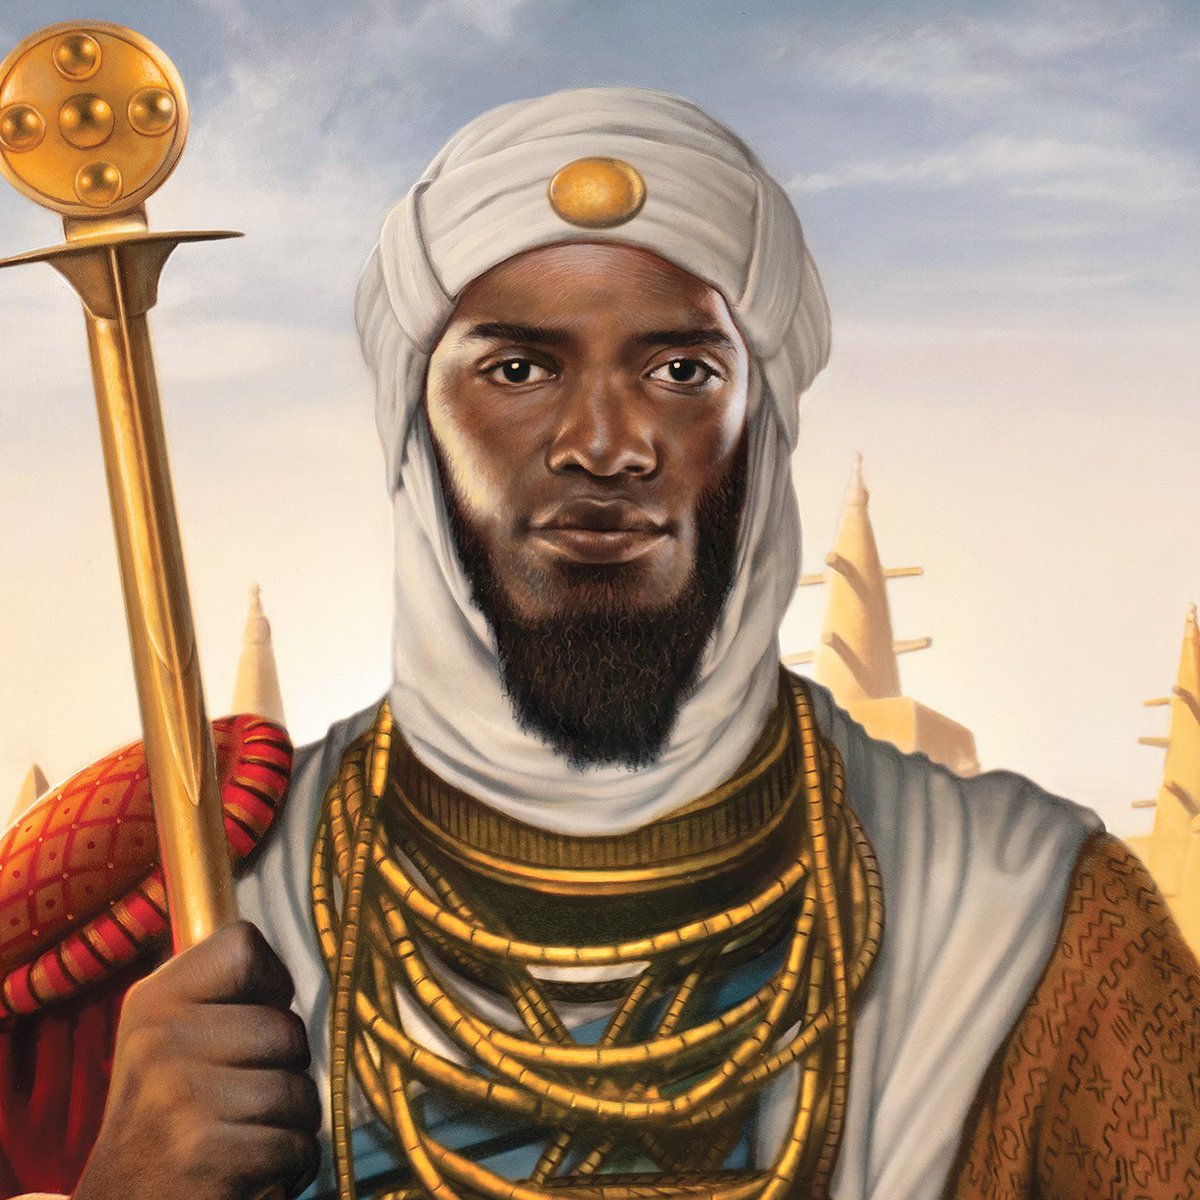 this civilization reached its peak under the rule of mansa musa who made his wealth through mali's supply of salt, gold and ivory to most of the world. musa is estimated to have been worth $400 in today's currency, making him the richest man of all time.